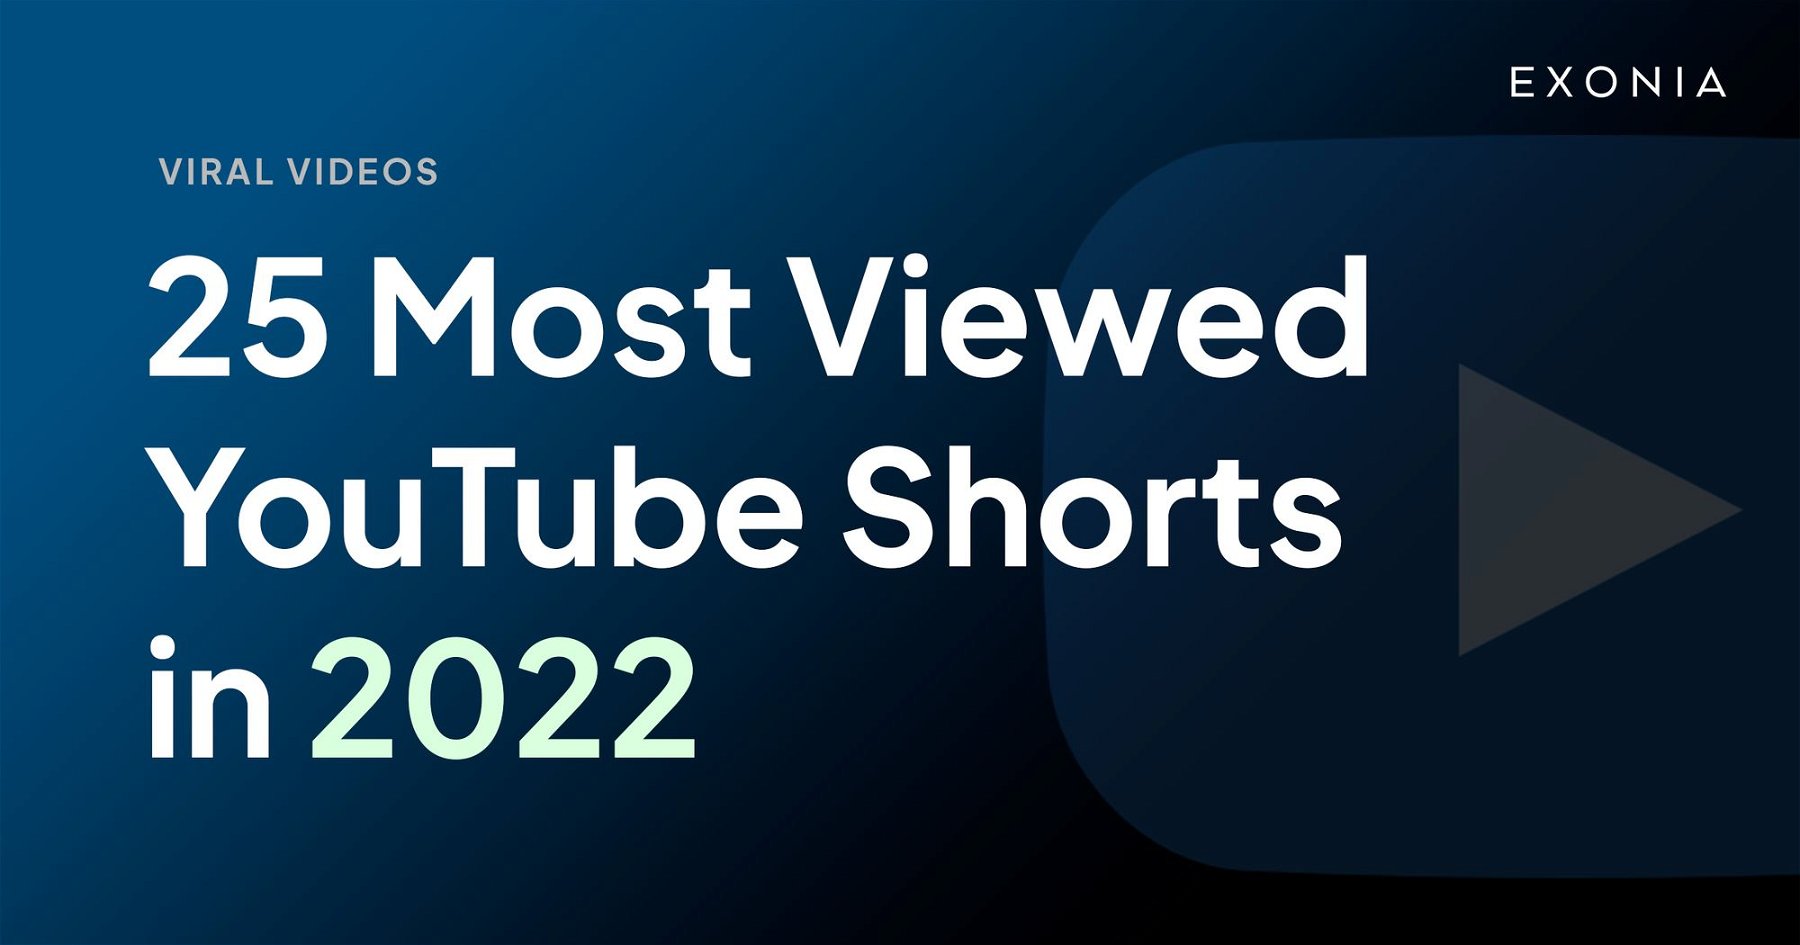 25 Most Viewed YouTube Shorts in 2022